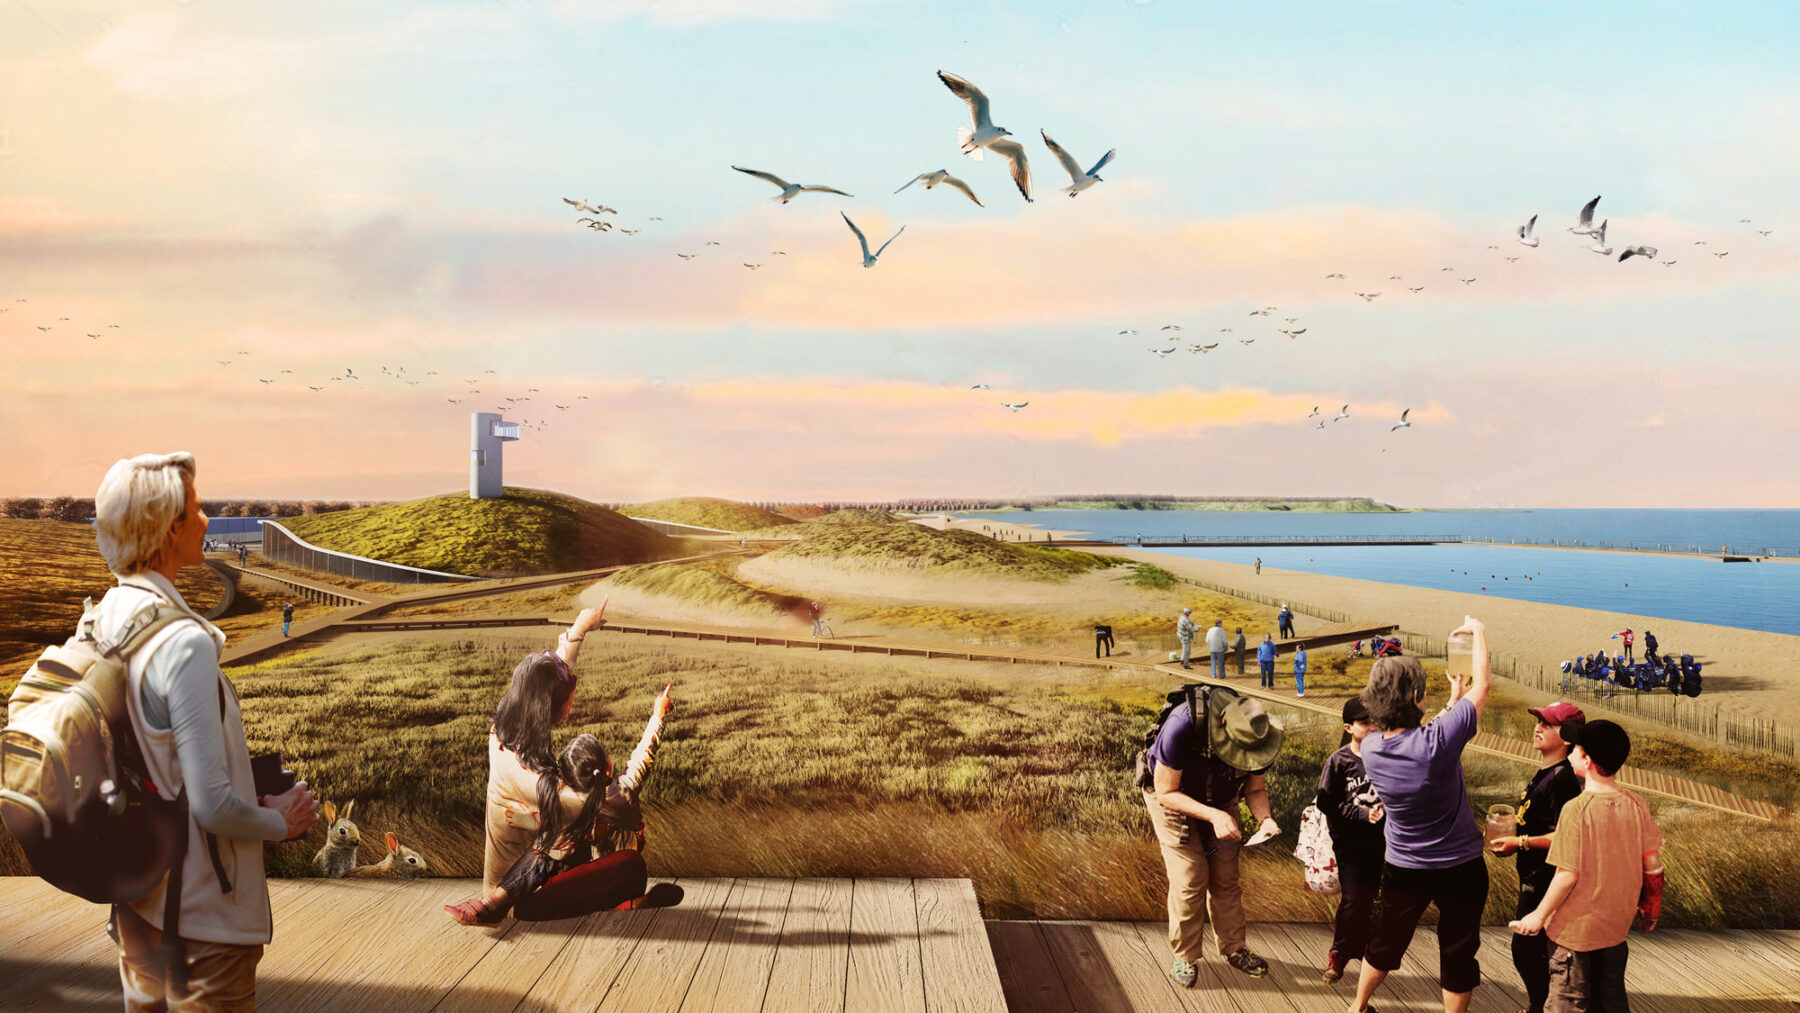 rendering of sand dune landscape with people observing birds flying over sea